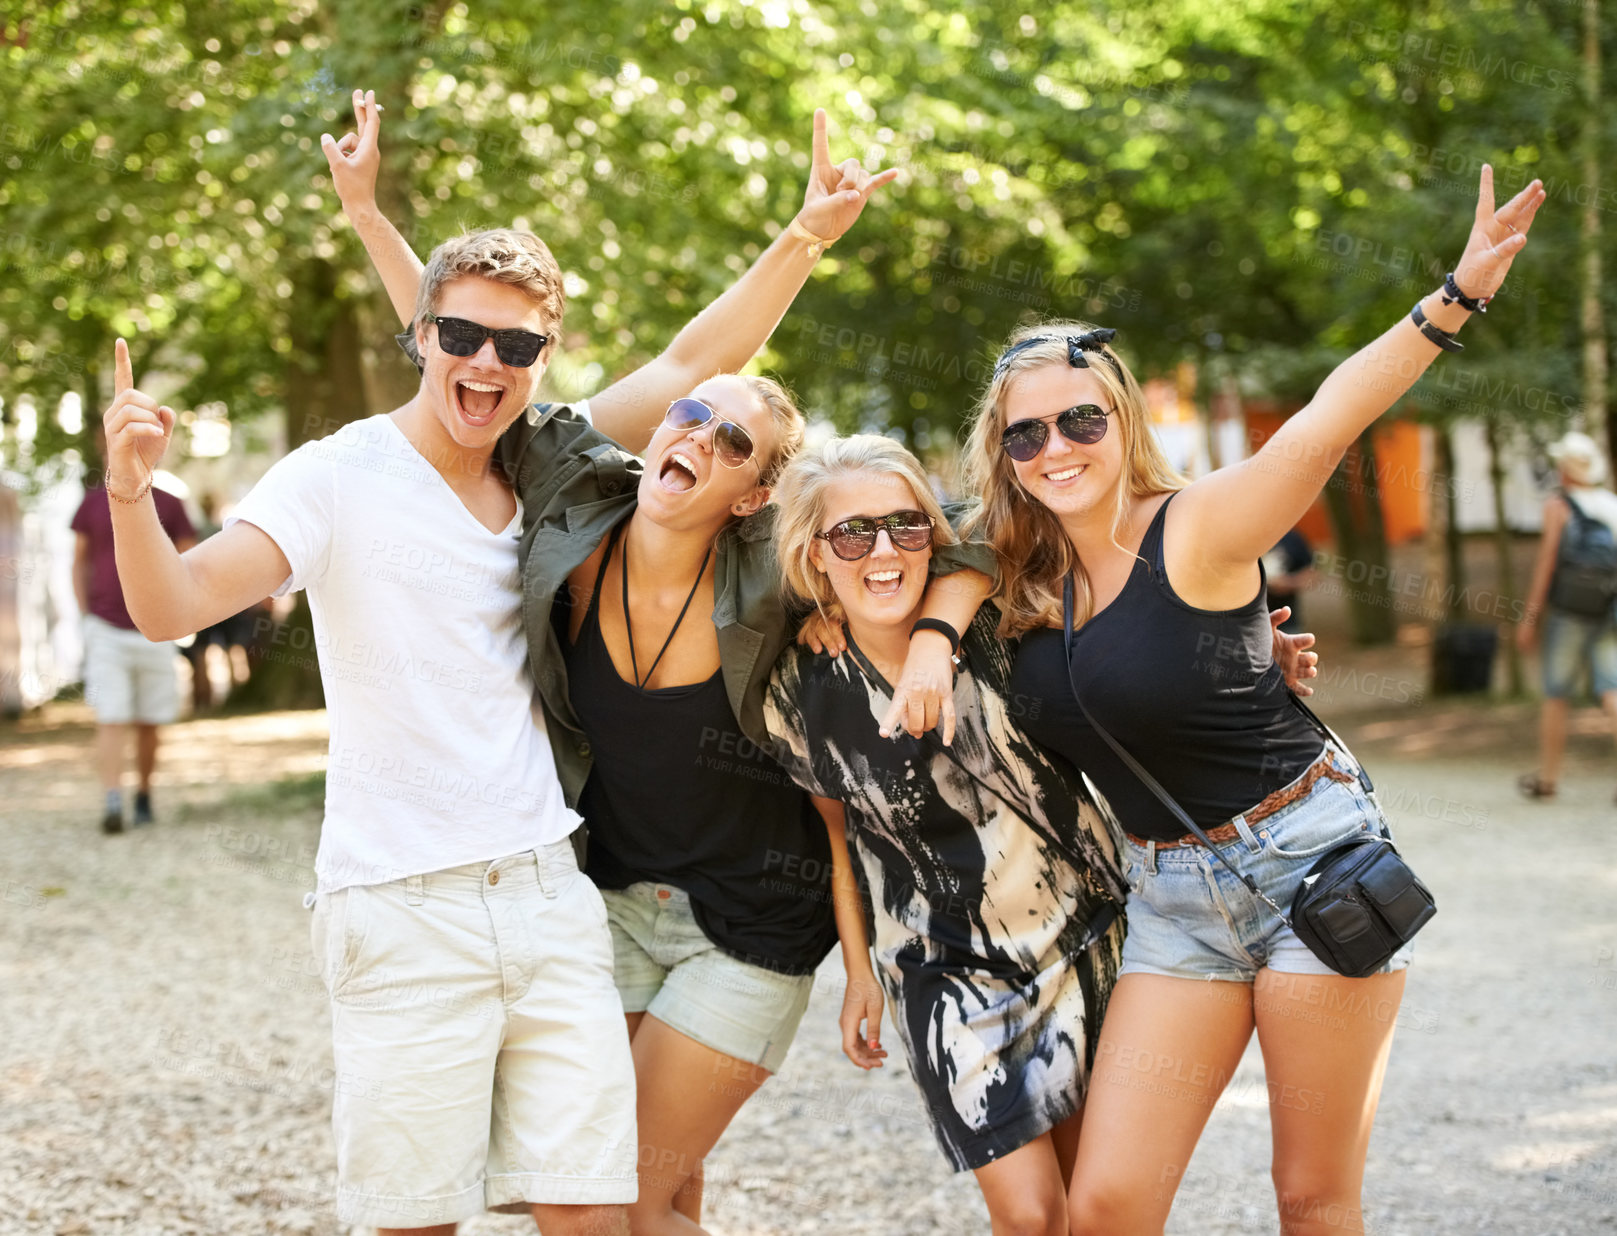 Buy stock photo Four friends partying and celebrating at a music festival